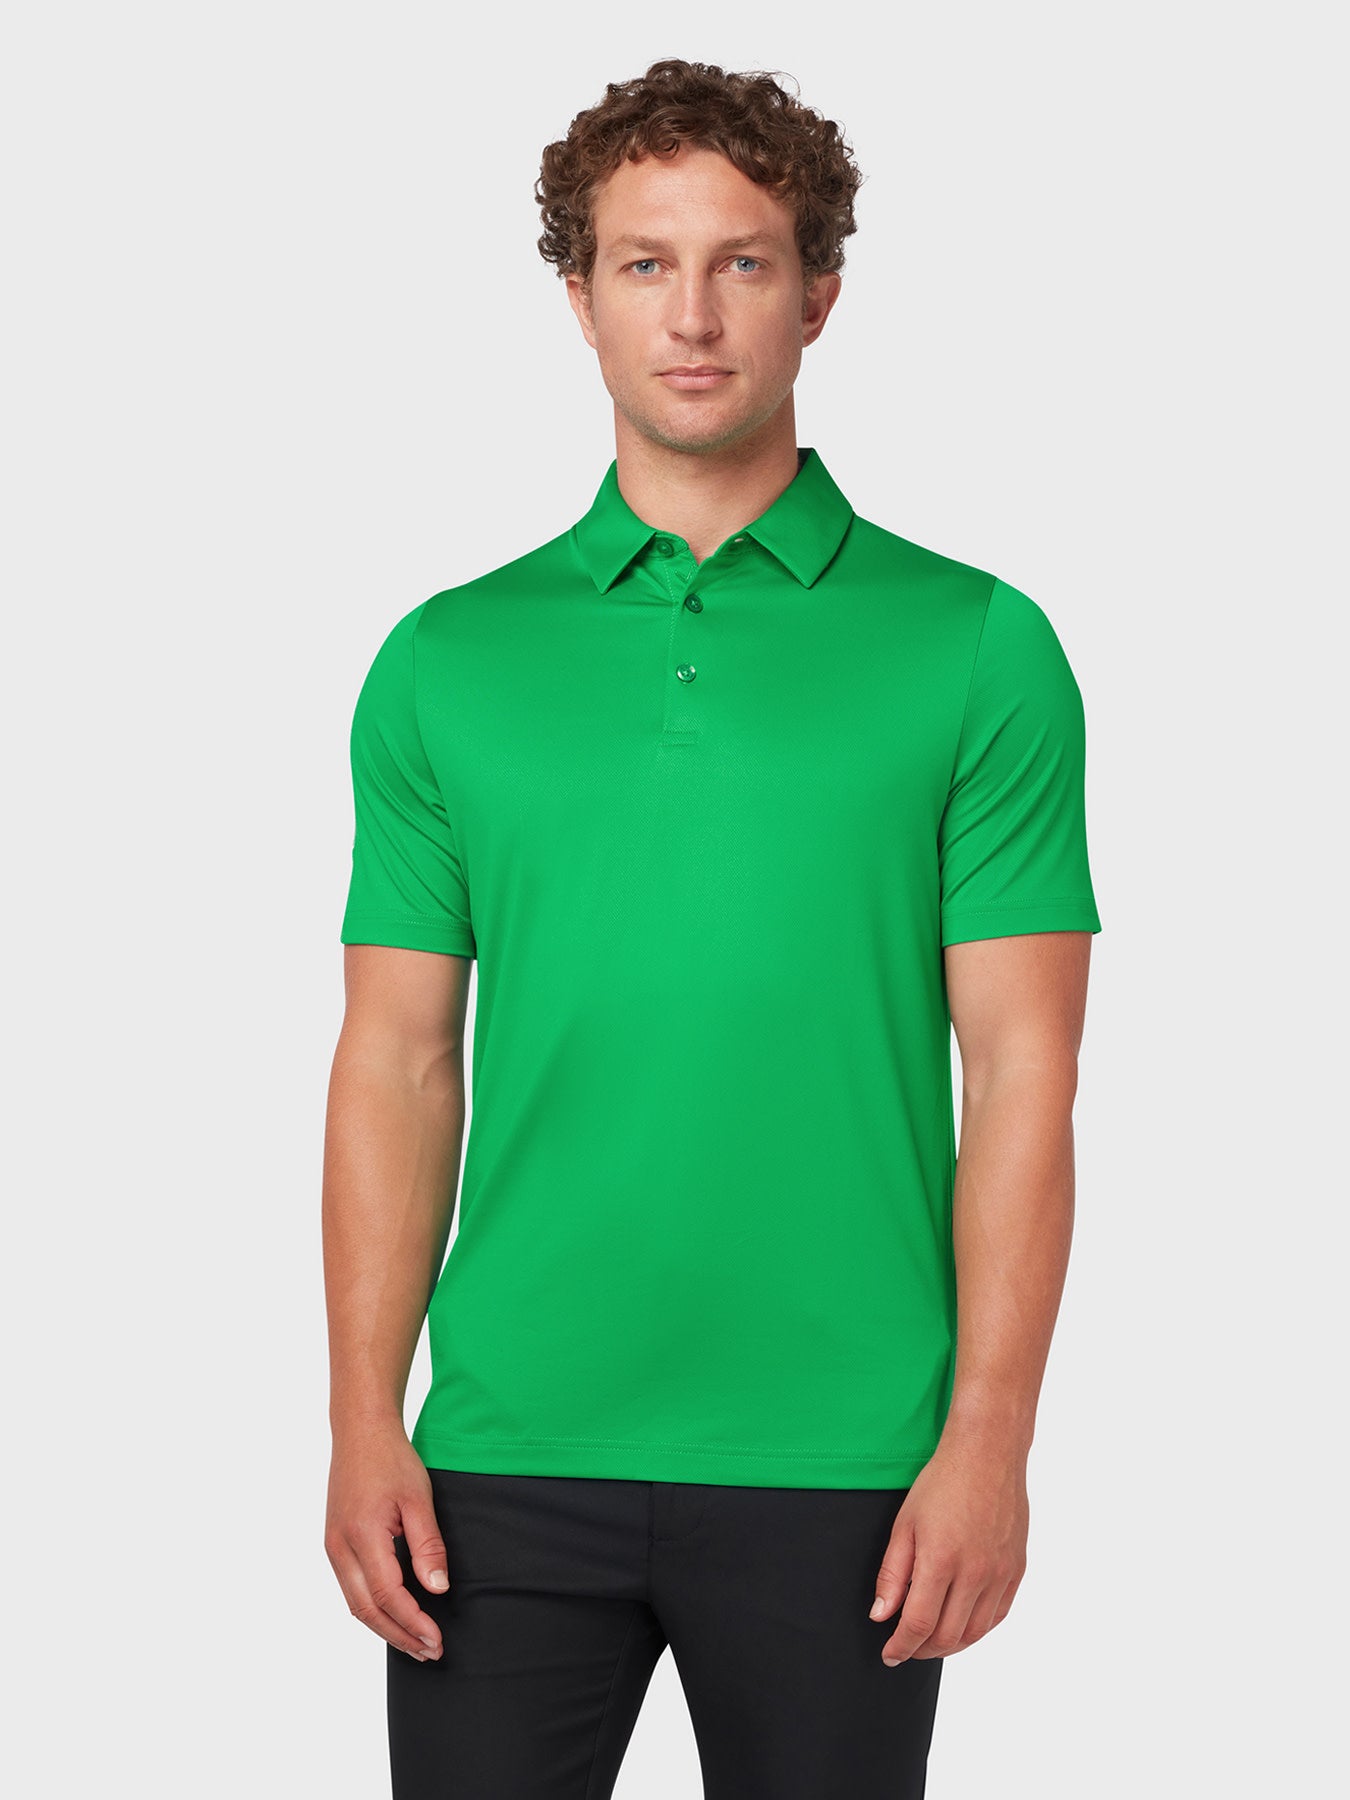 View Swing Tech Tour Polo In Golf Green information